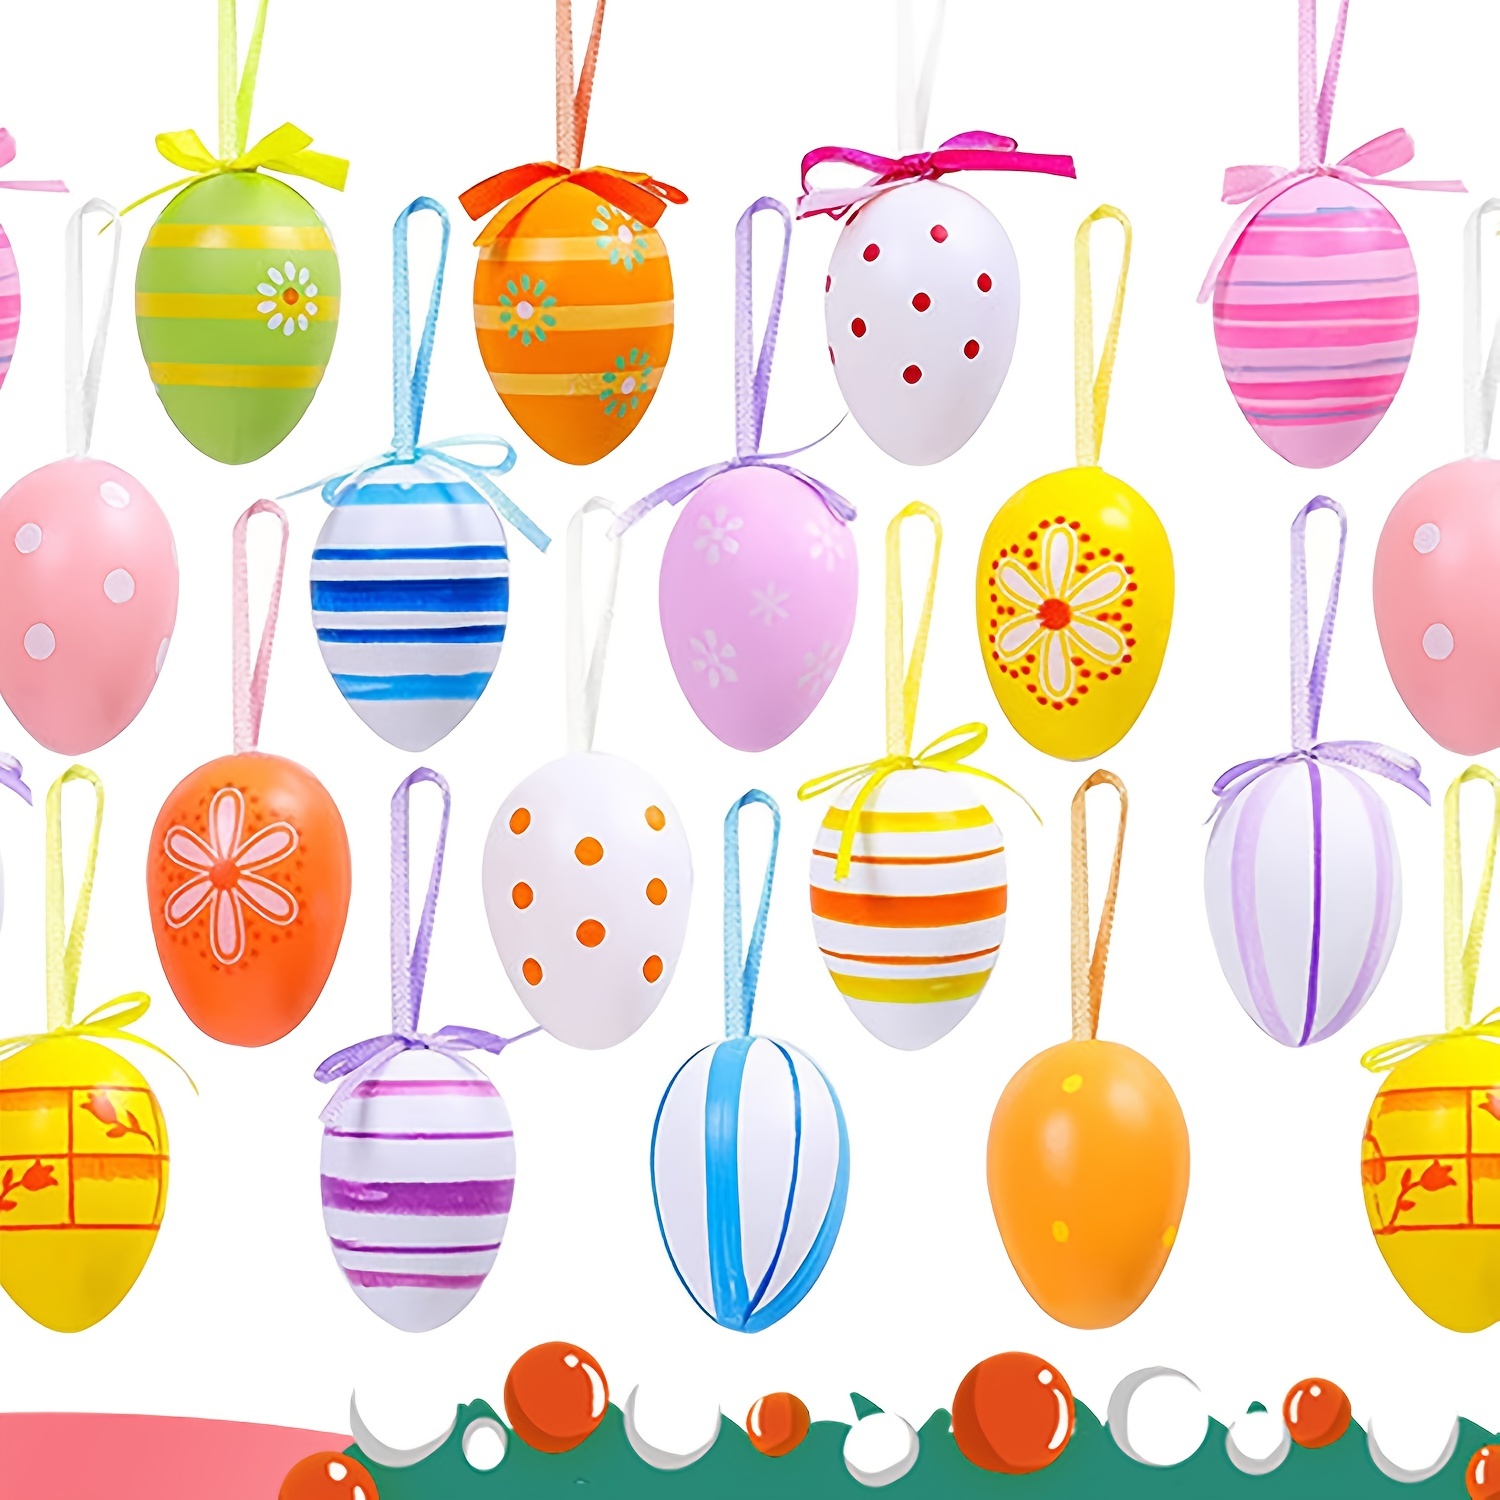 12pcs Hand Painted Easter Eggs - Party Make Up, DIY Imitation Egg